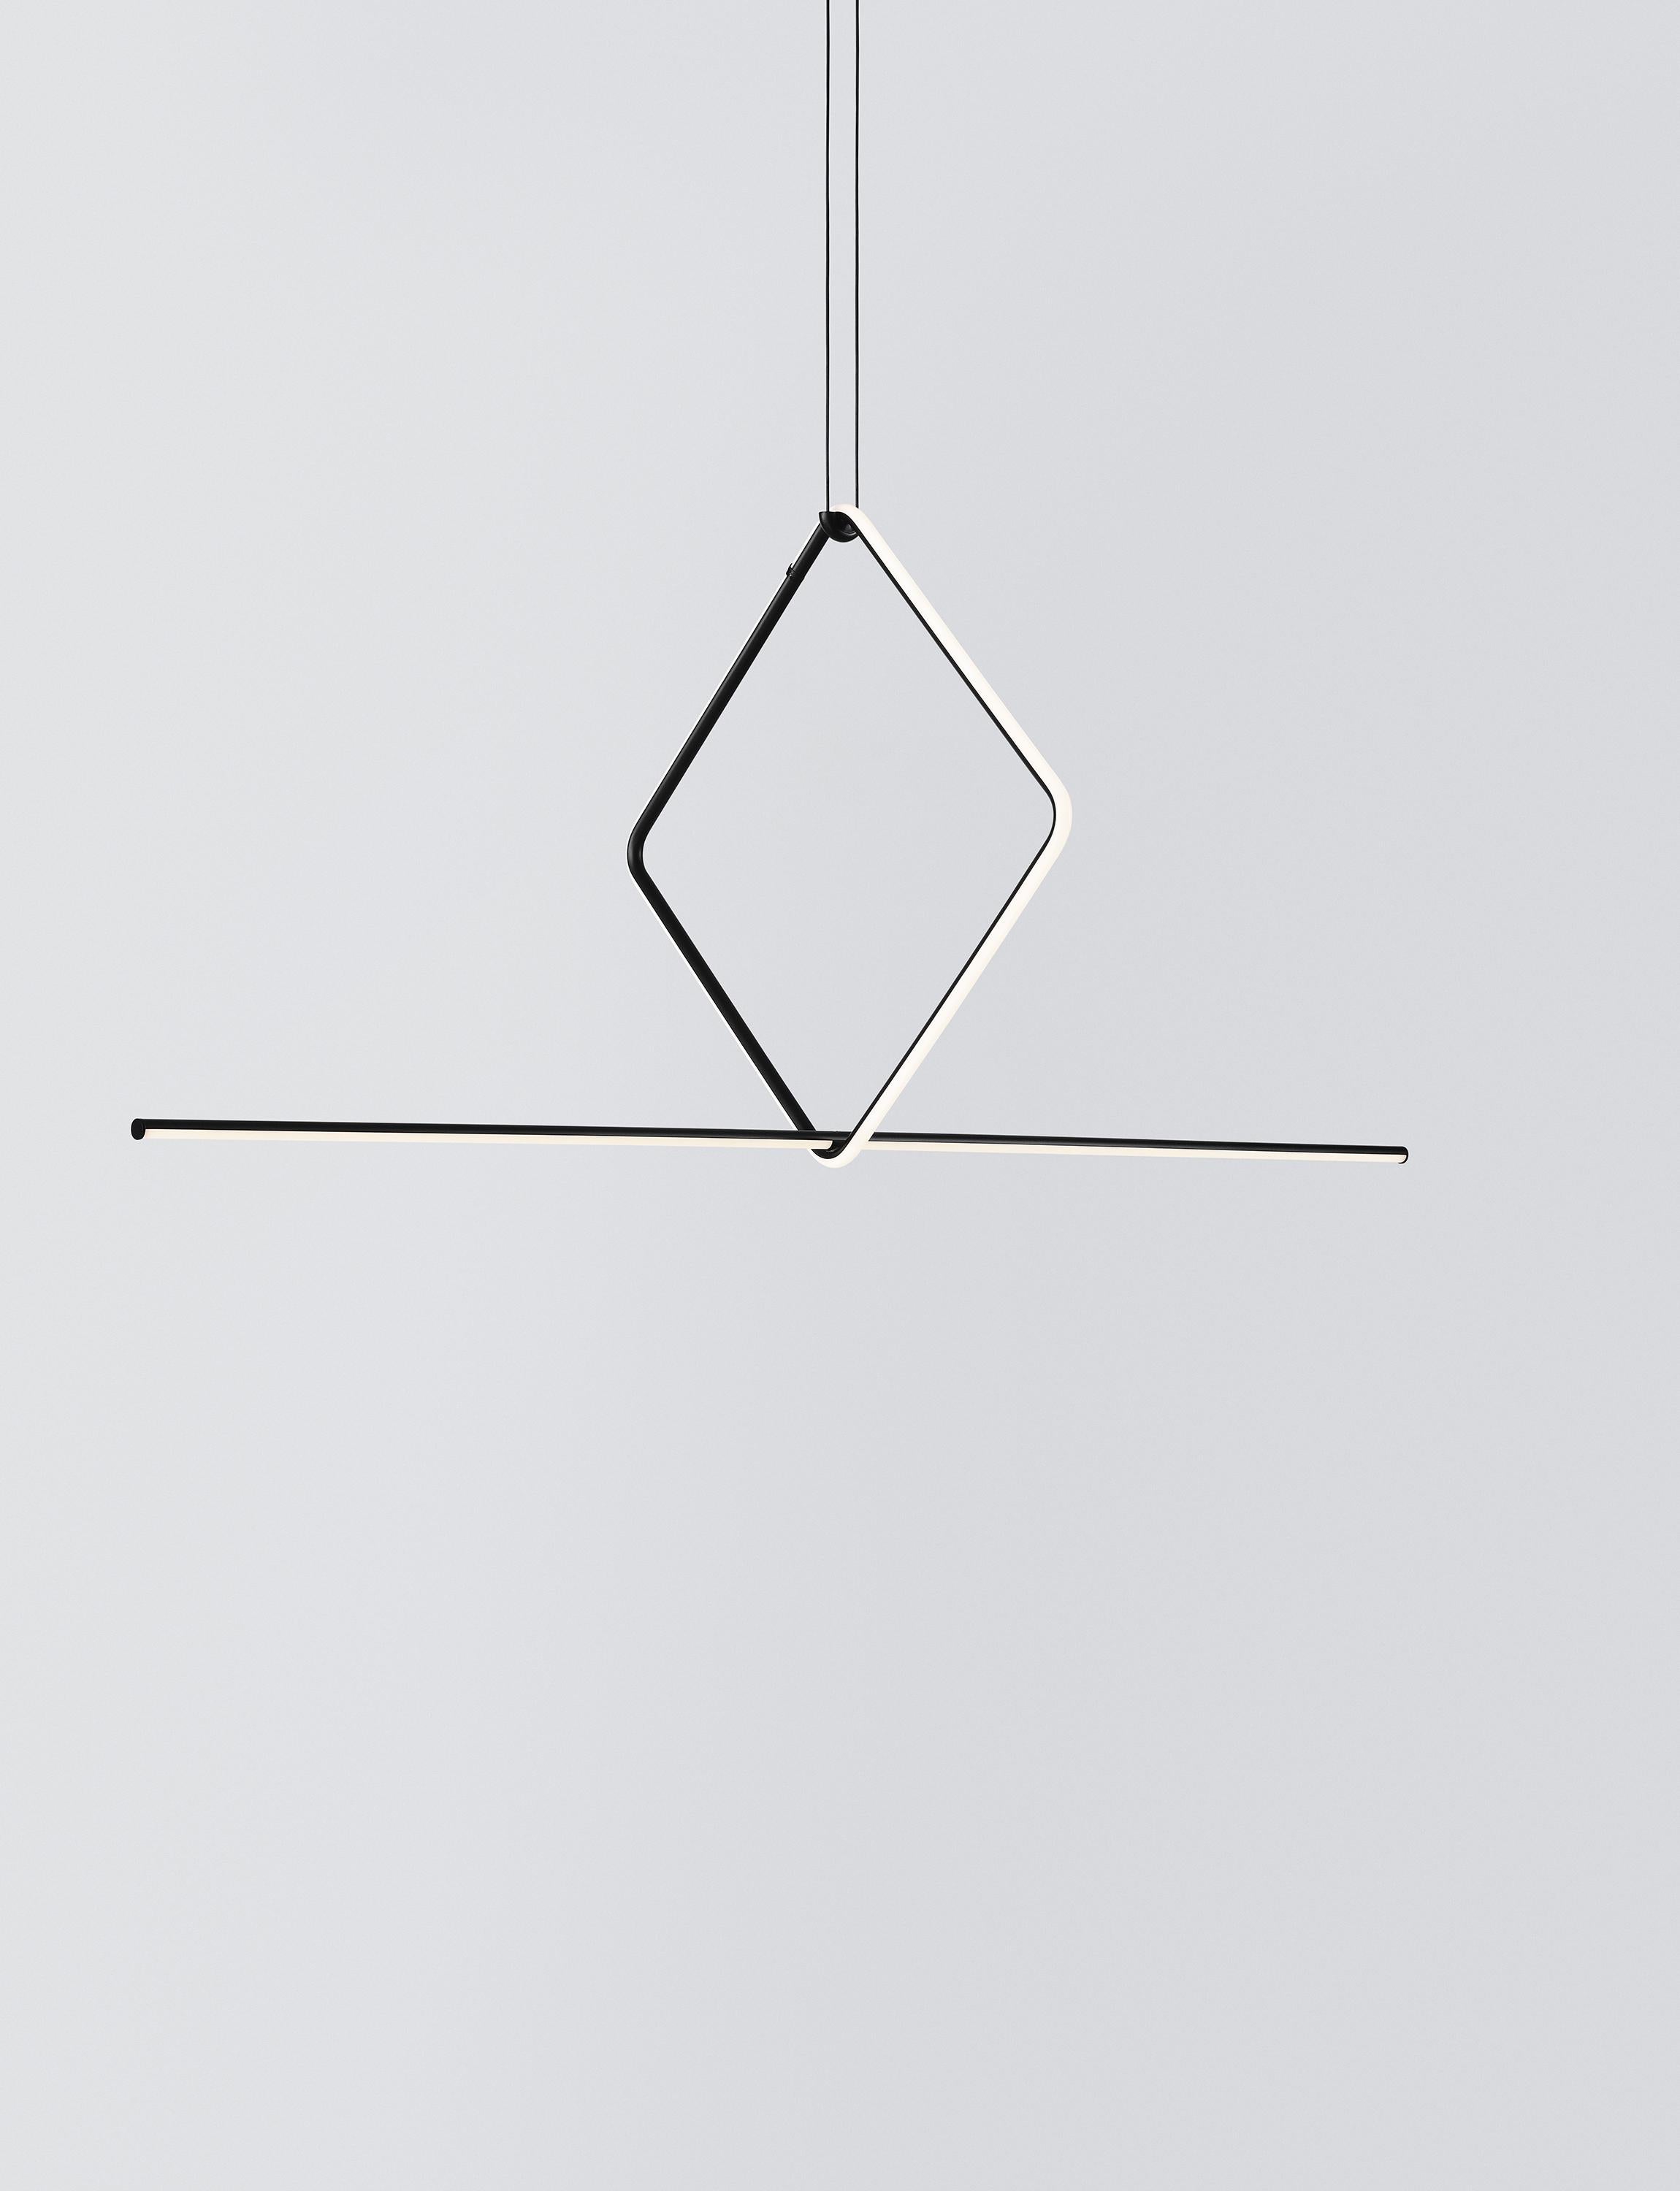 Arrangements is a modular system of geometric light elements that can be combined in different ways, creating multiple compositions into individual chandeliers. Each unit simply attaches onto the previous one as if resting, balancing perfectly as a